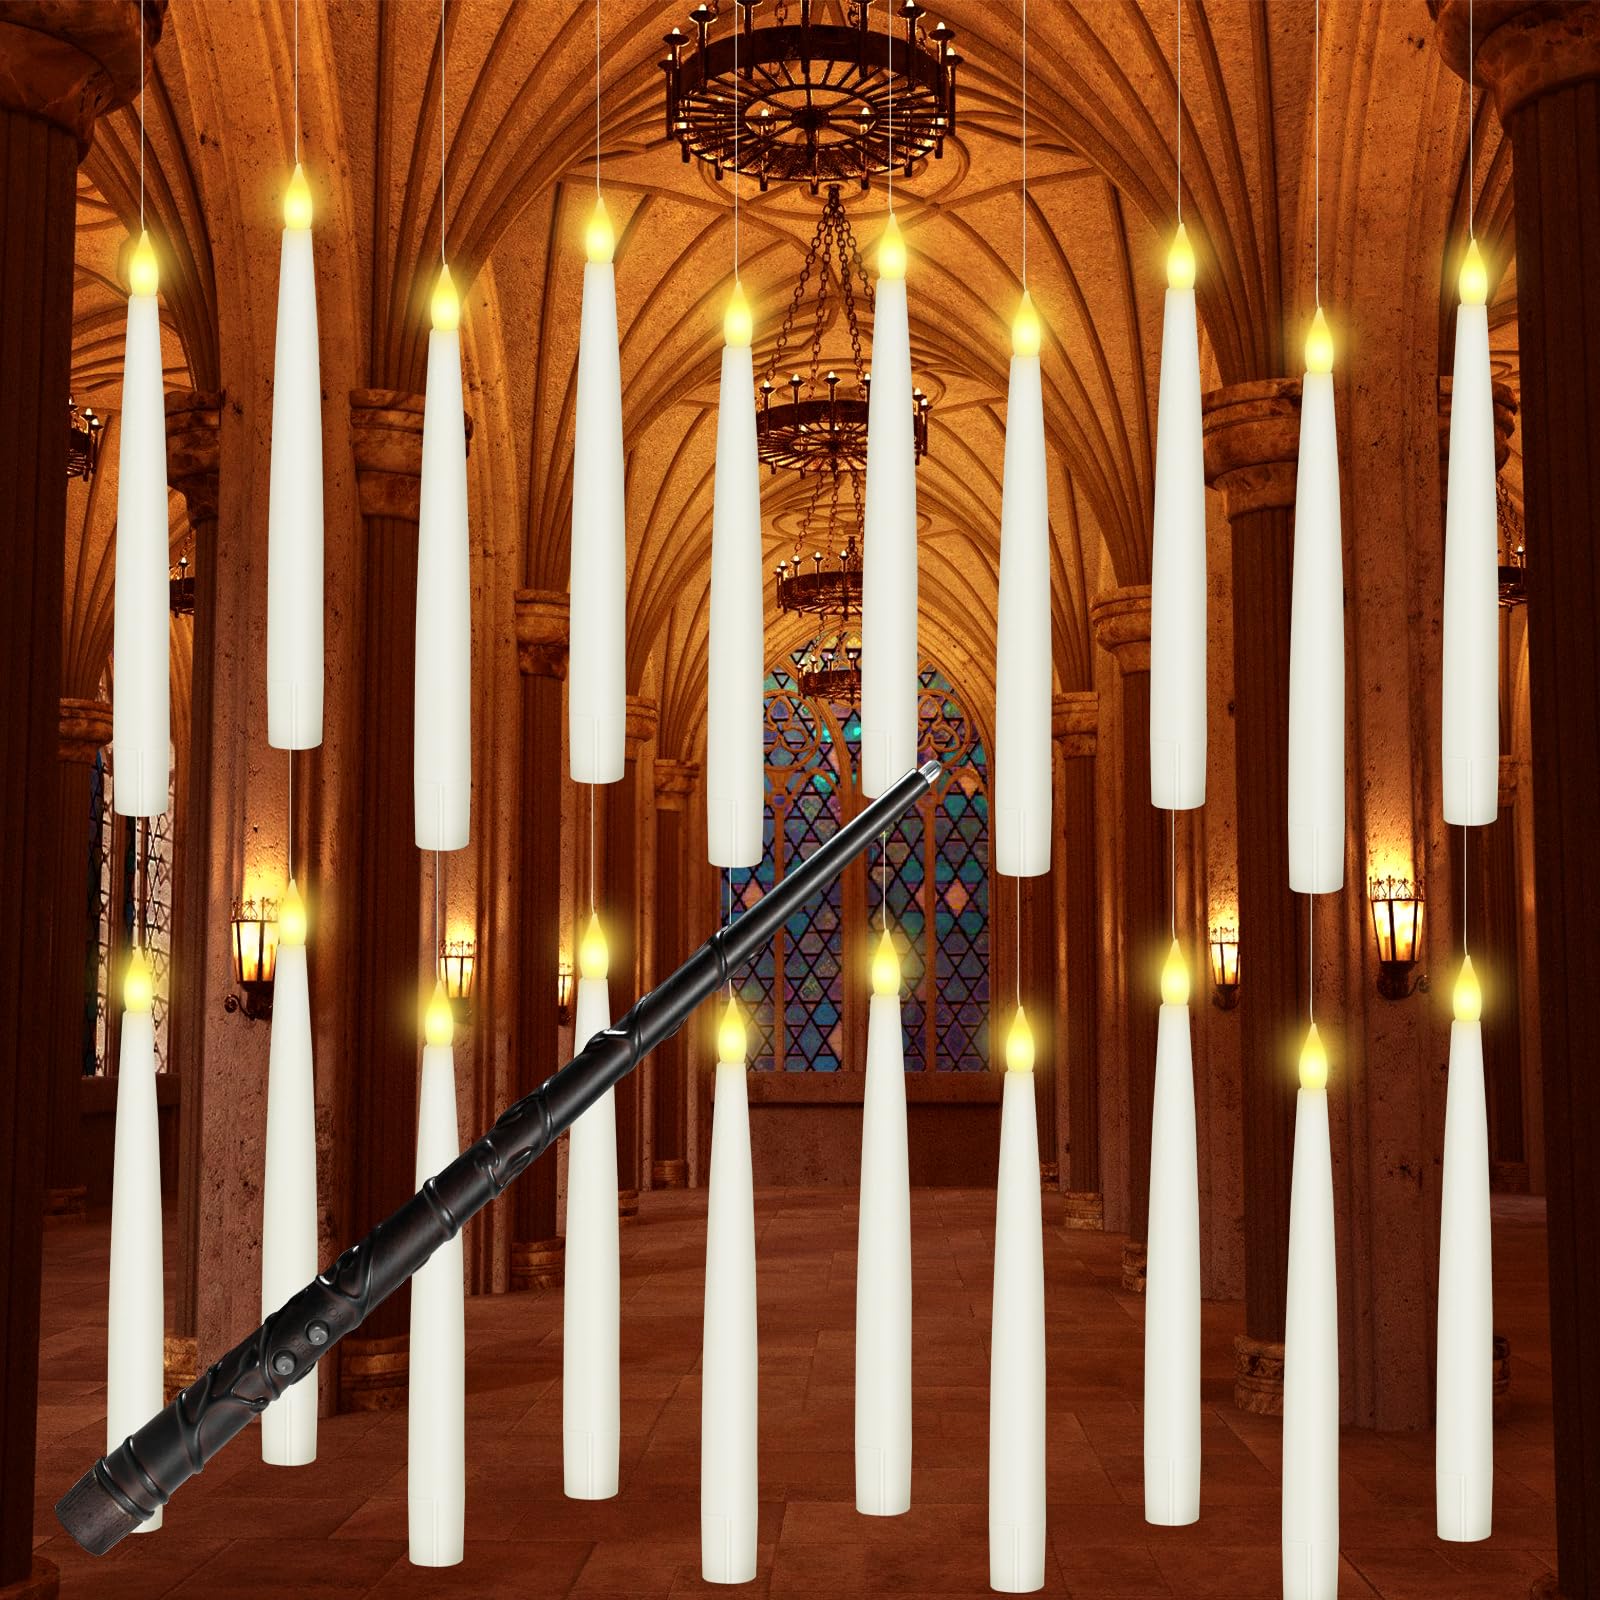 Jangebot™ Floating Candles with Wand Remote